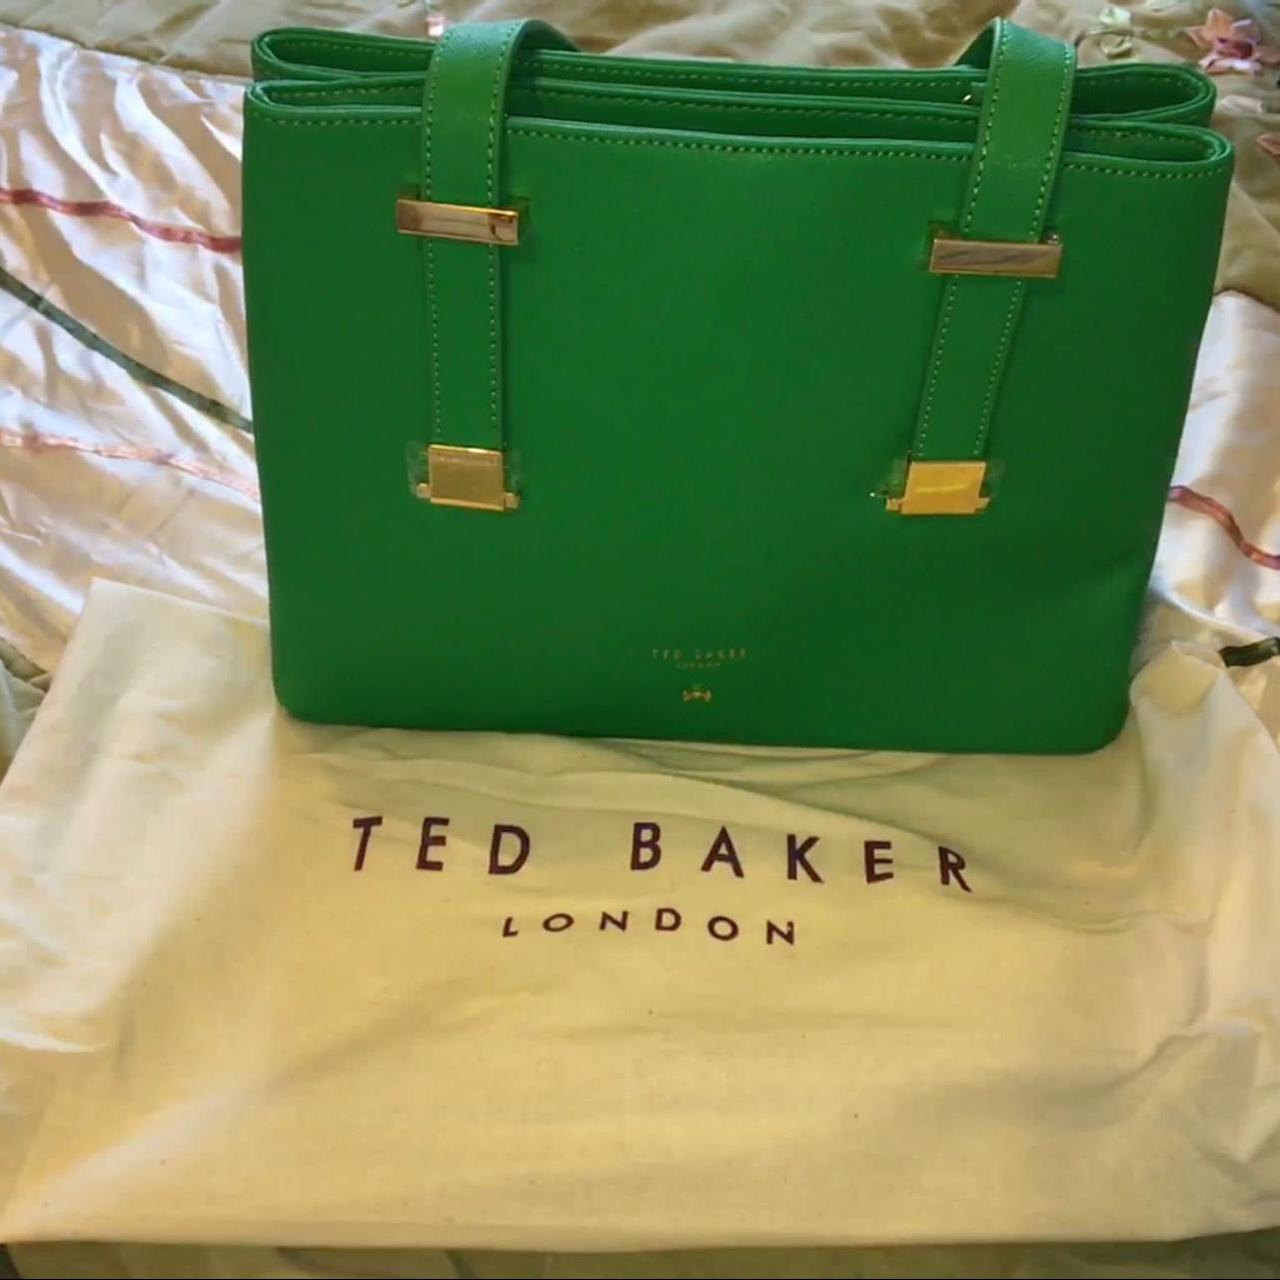 Ted Baker Croccon Green Shopper TB253518L - Bags